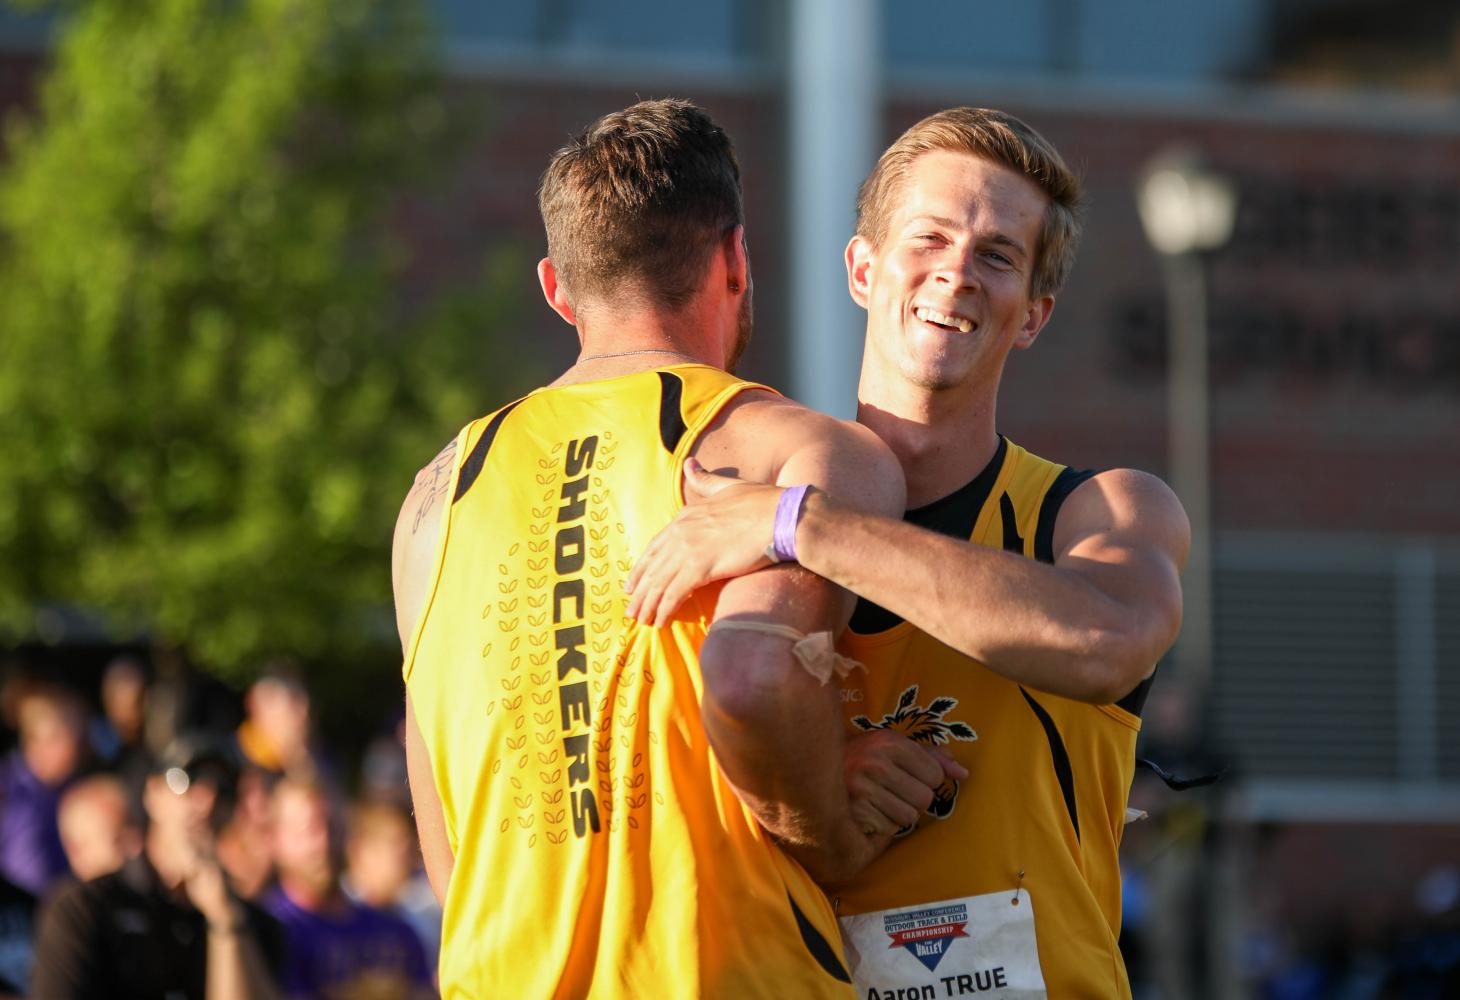 Aaron+True+hugs+a+teammate+after+winning+the+javelin+with+a+throw+of+229+feet+3+inches+on+Friday+at+the+Missouri+Valley+Conference+Outdoor+Track+and+Field+Championship.+%28May+12%2C+2017%29